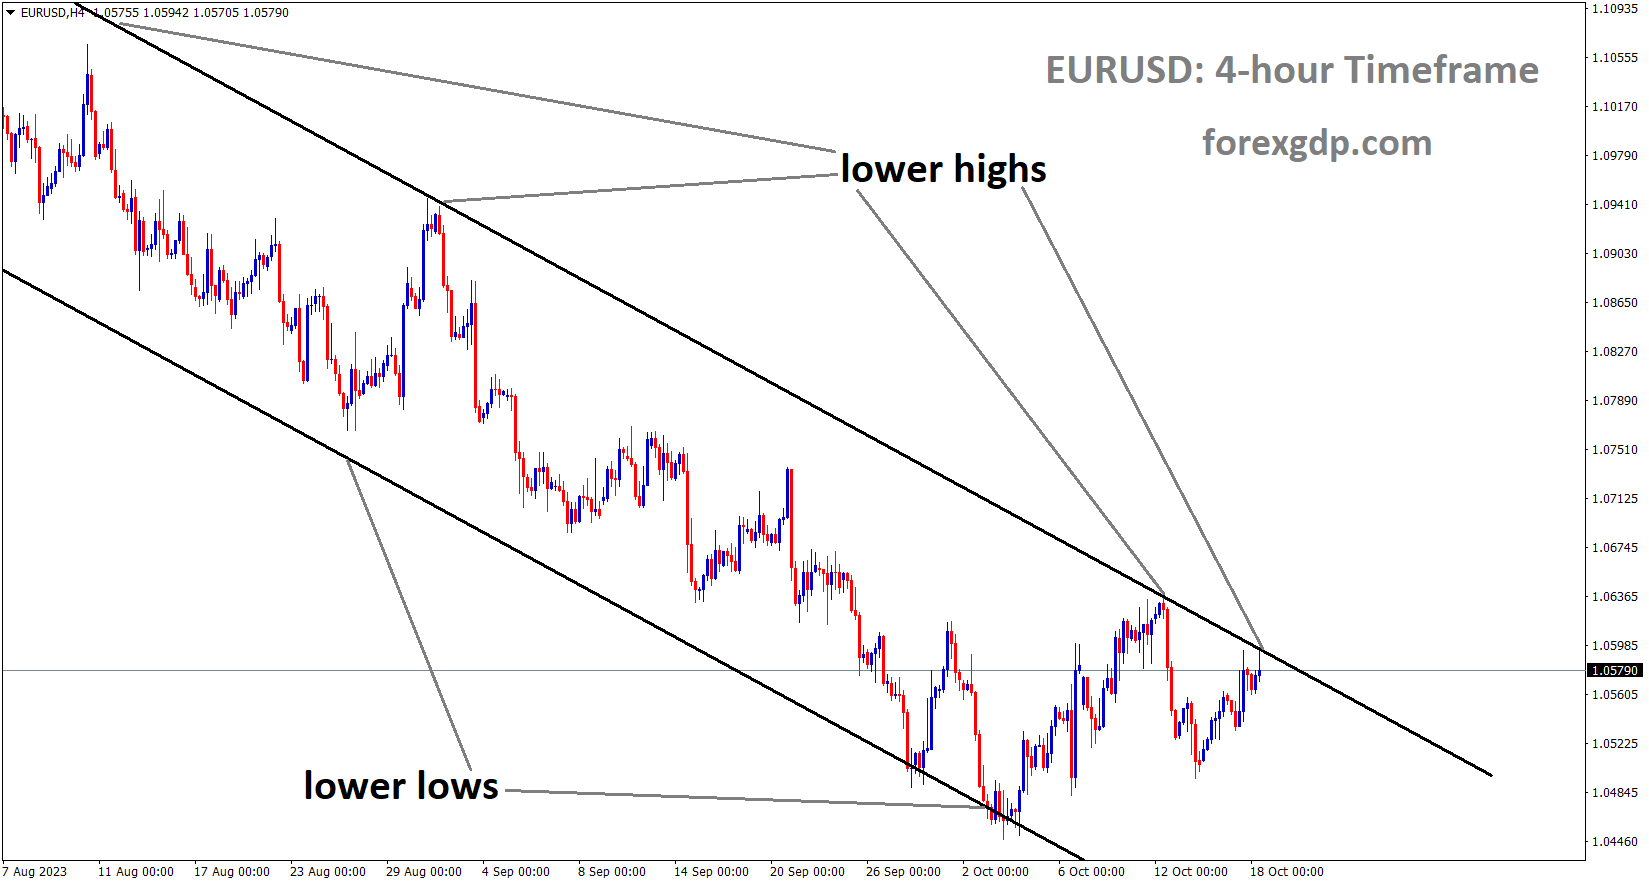 EURUSD is moving in the Descending channel and the market has reached the lower high area of the channel